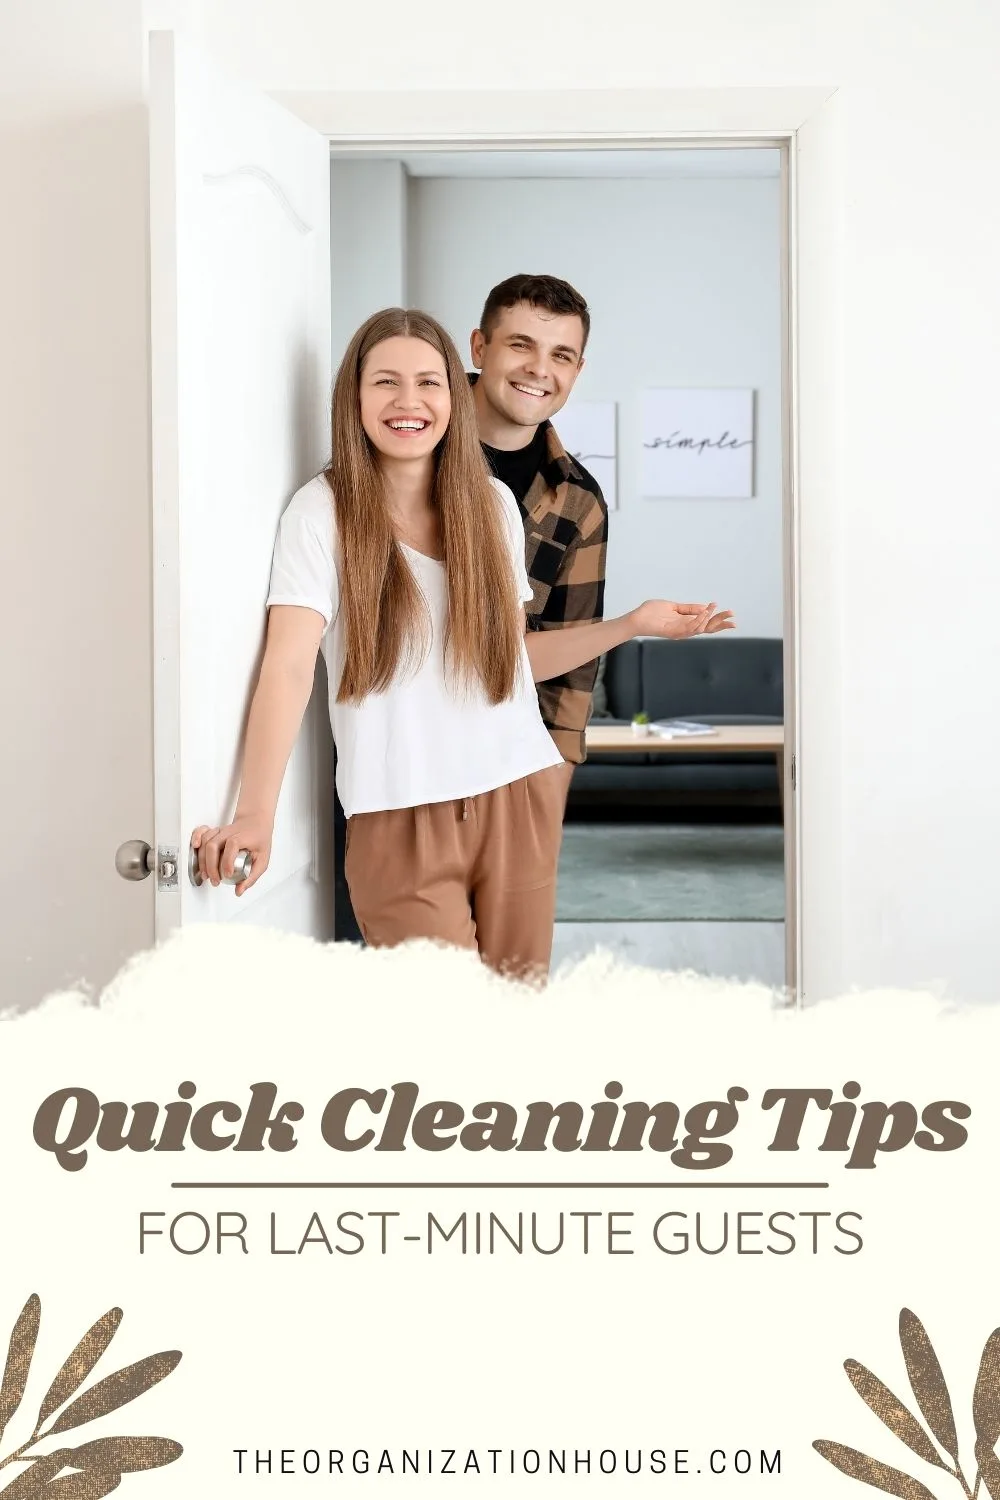 Quick Cleaning Tips for Last-Minute Guests